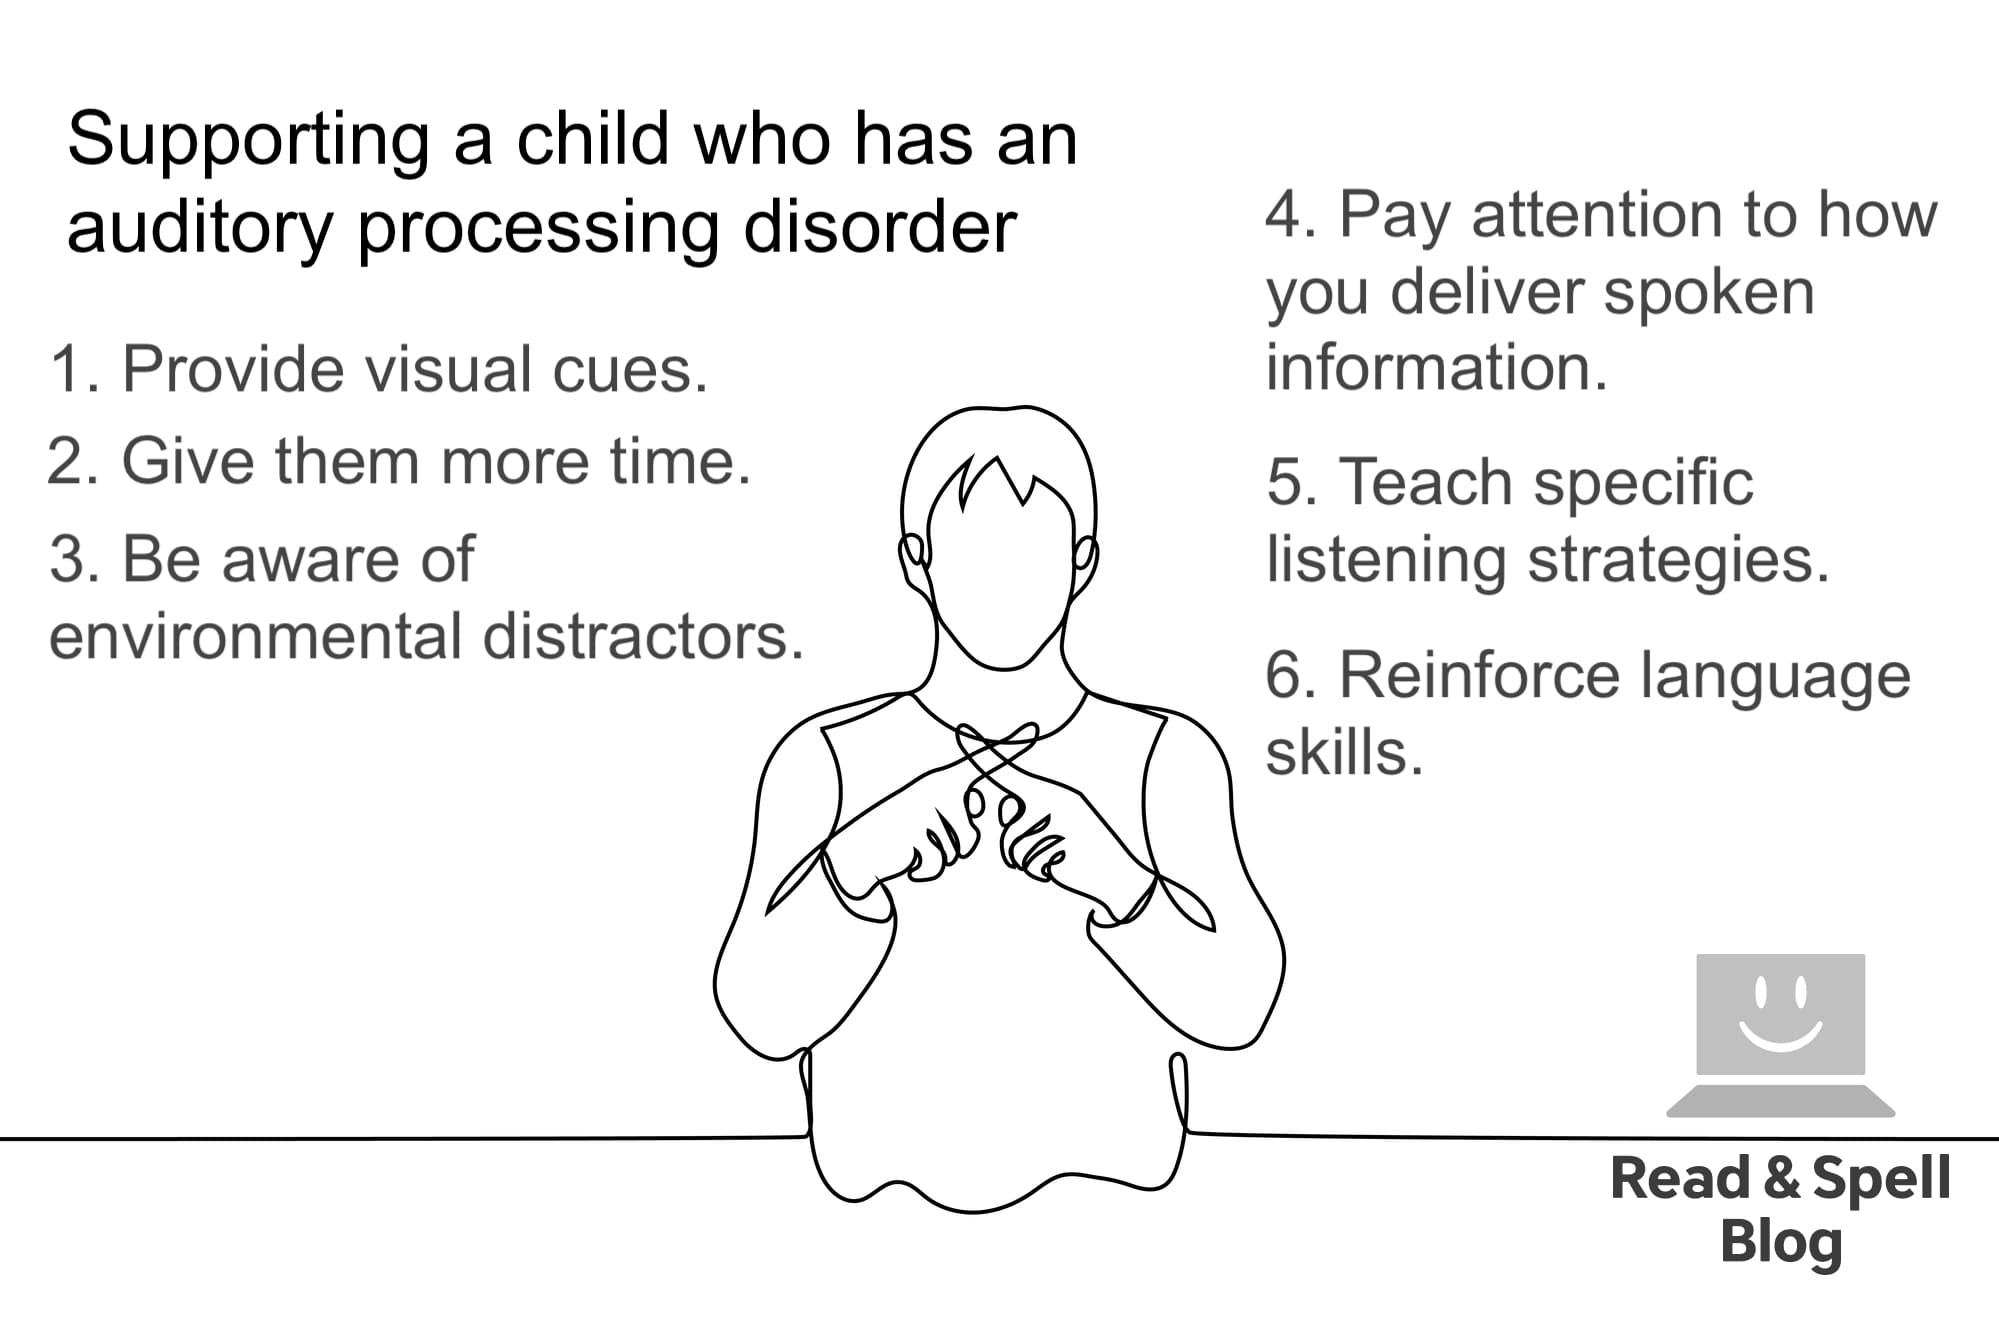 Auditory processing disorder in children